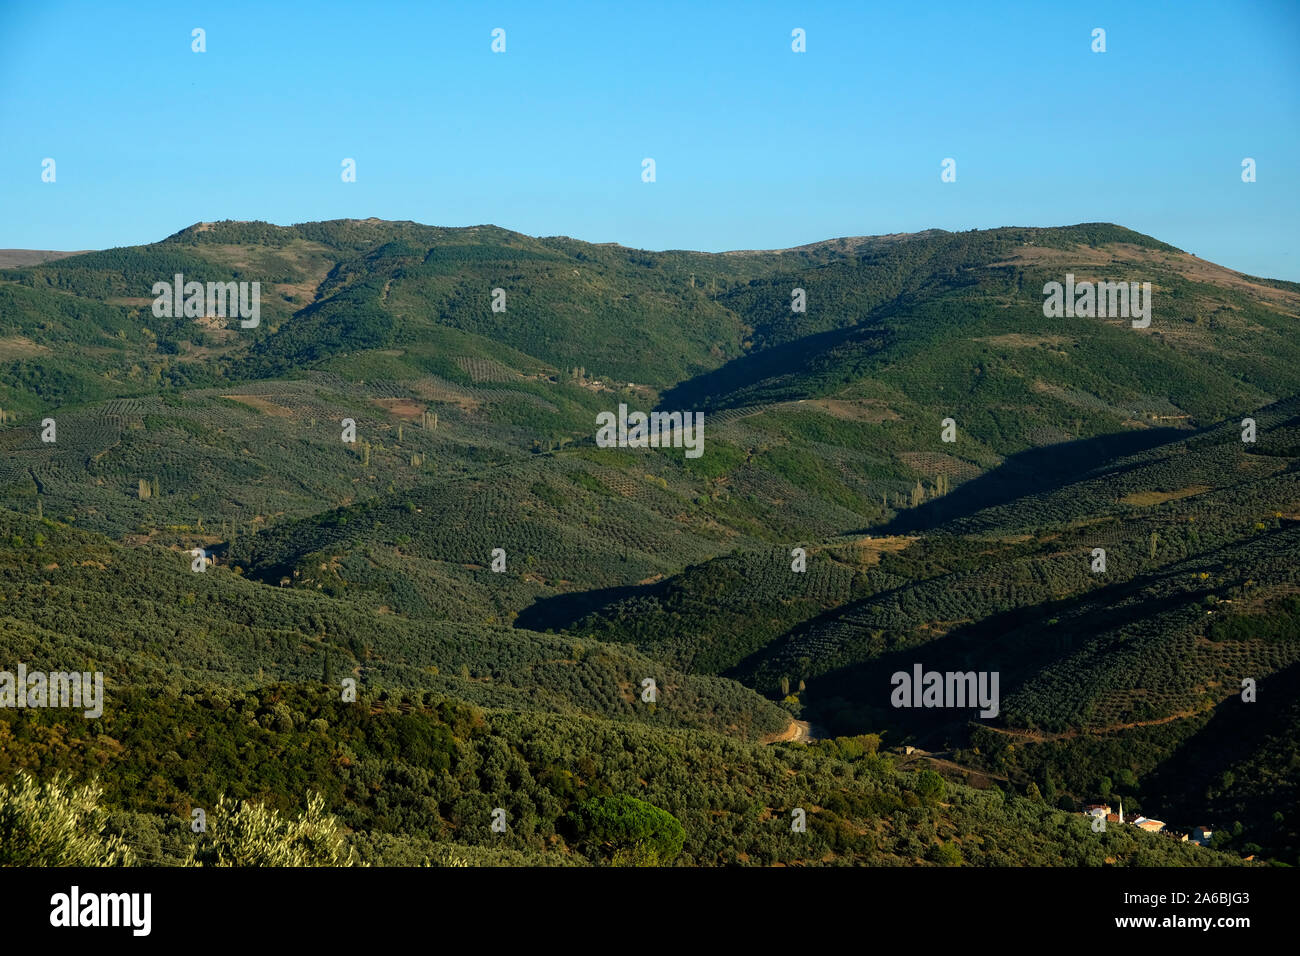 olive groves in gemlik create beautiful images Stock Photo